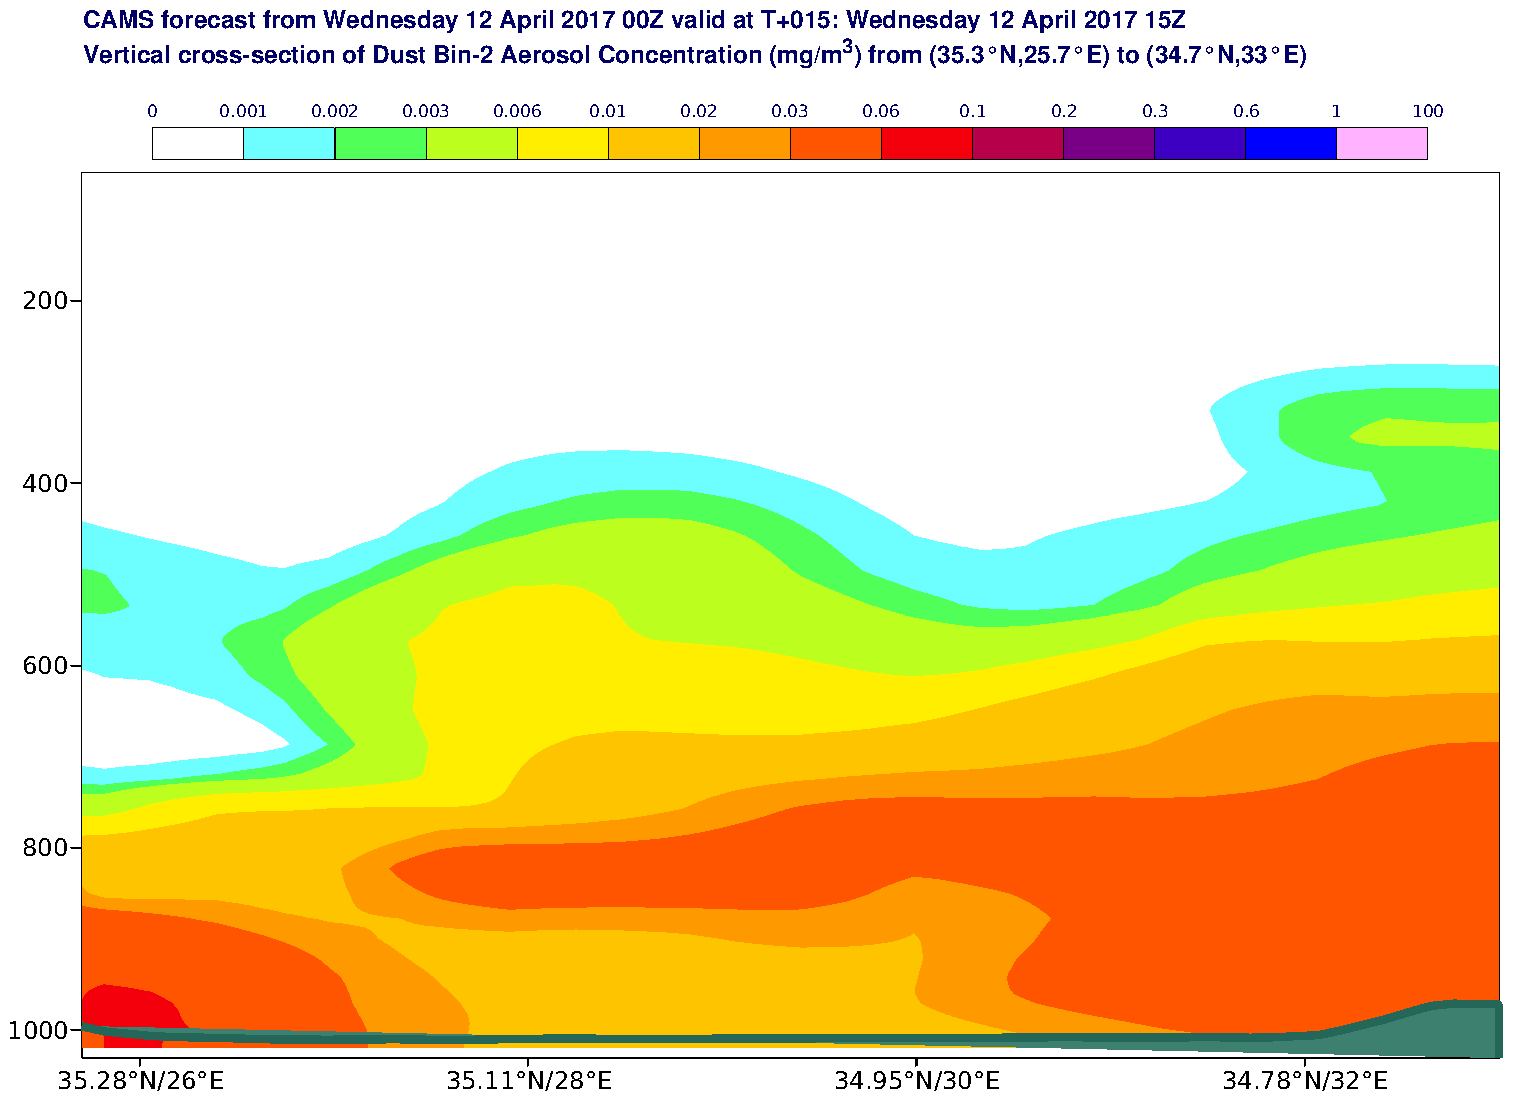 Vertical cross-section of Dust Bin-2 Aerosol Concentration (mg/m3) valid at T15 - 2017-04-12 15:00